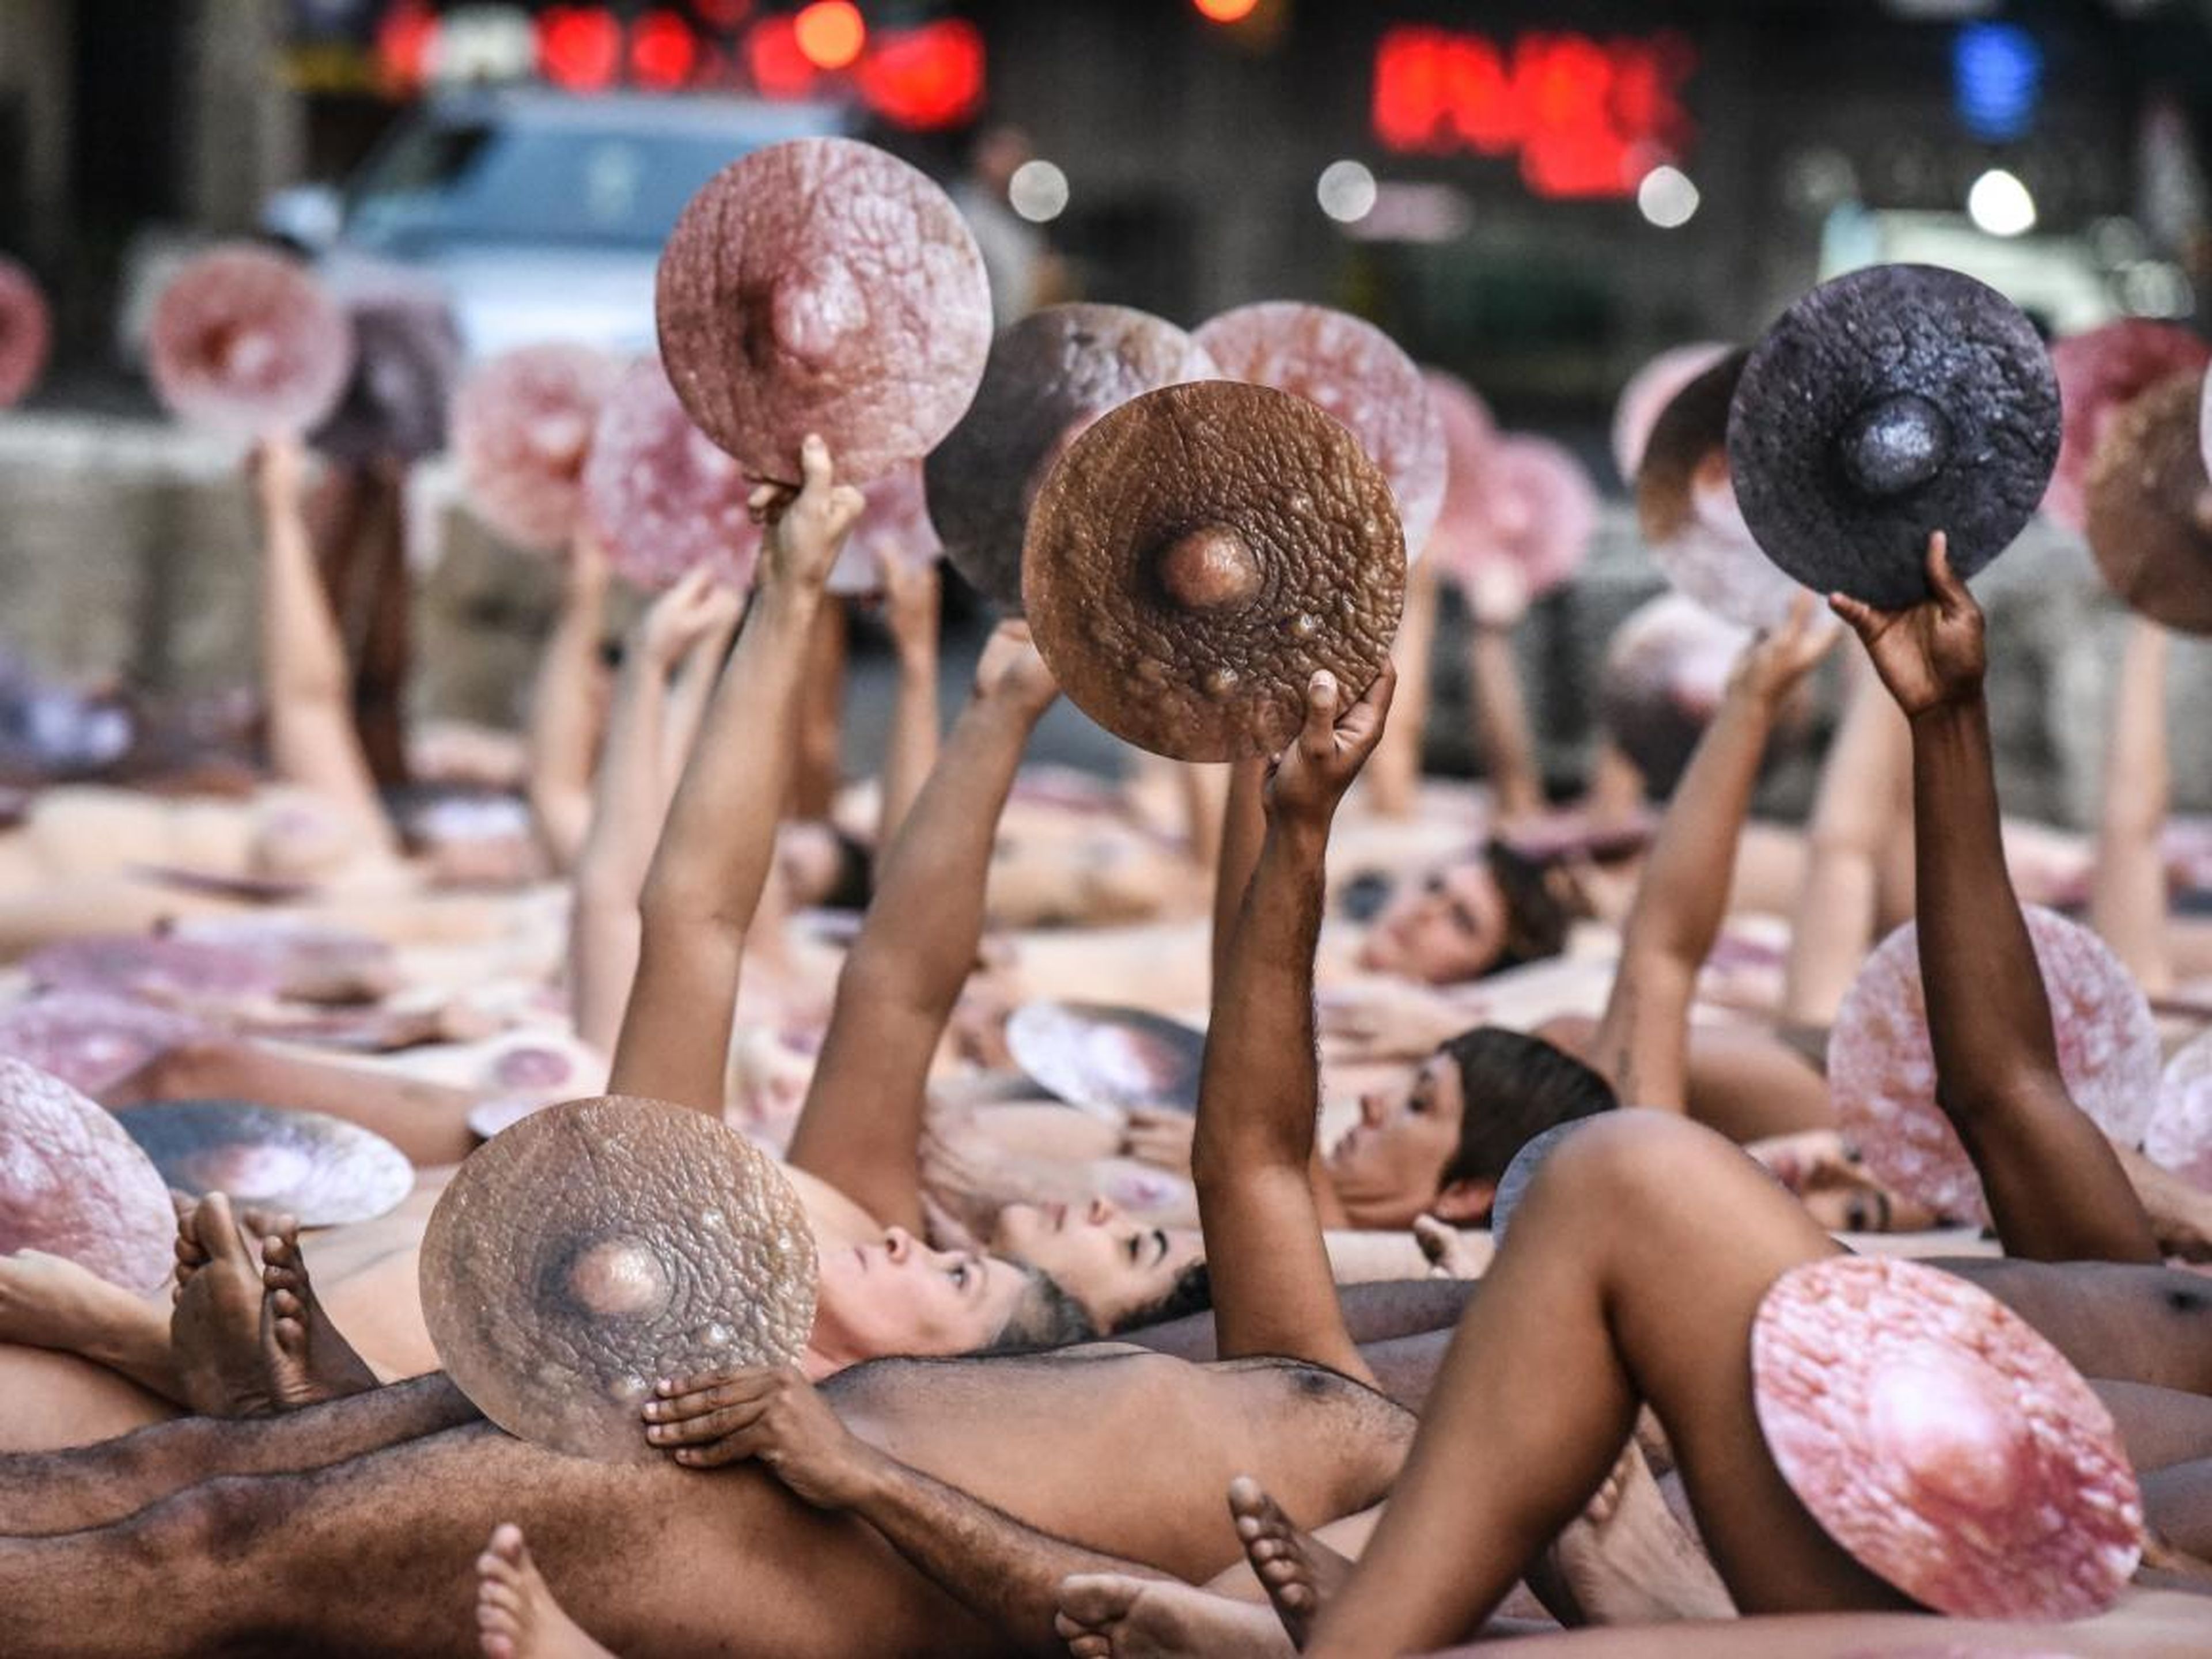 Naked people outside Facebook's New York office on Sunday.